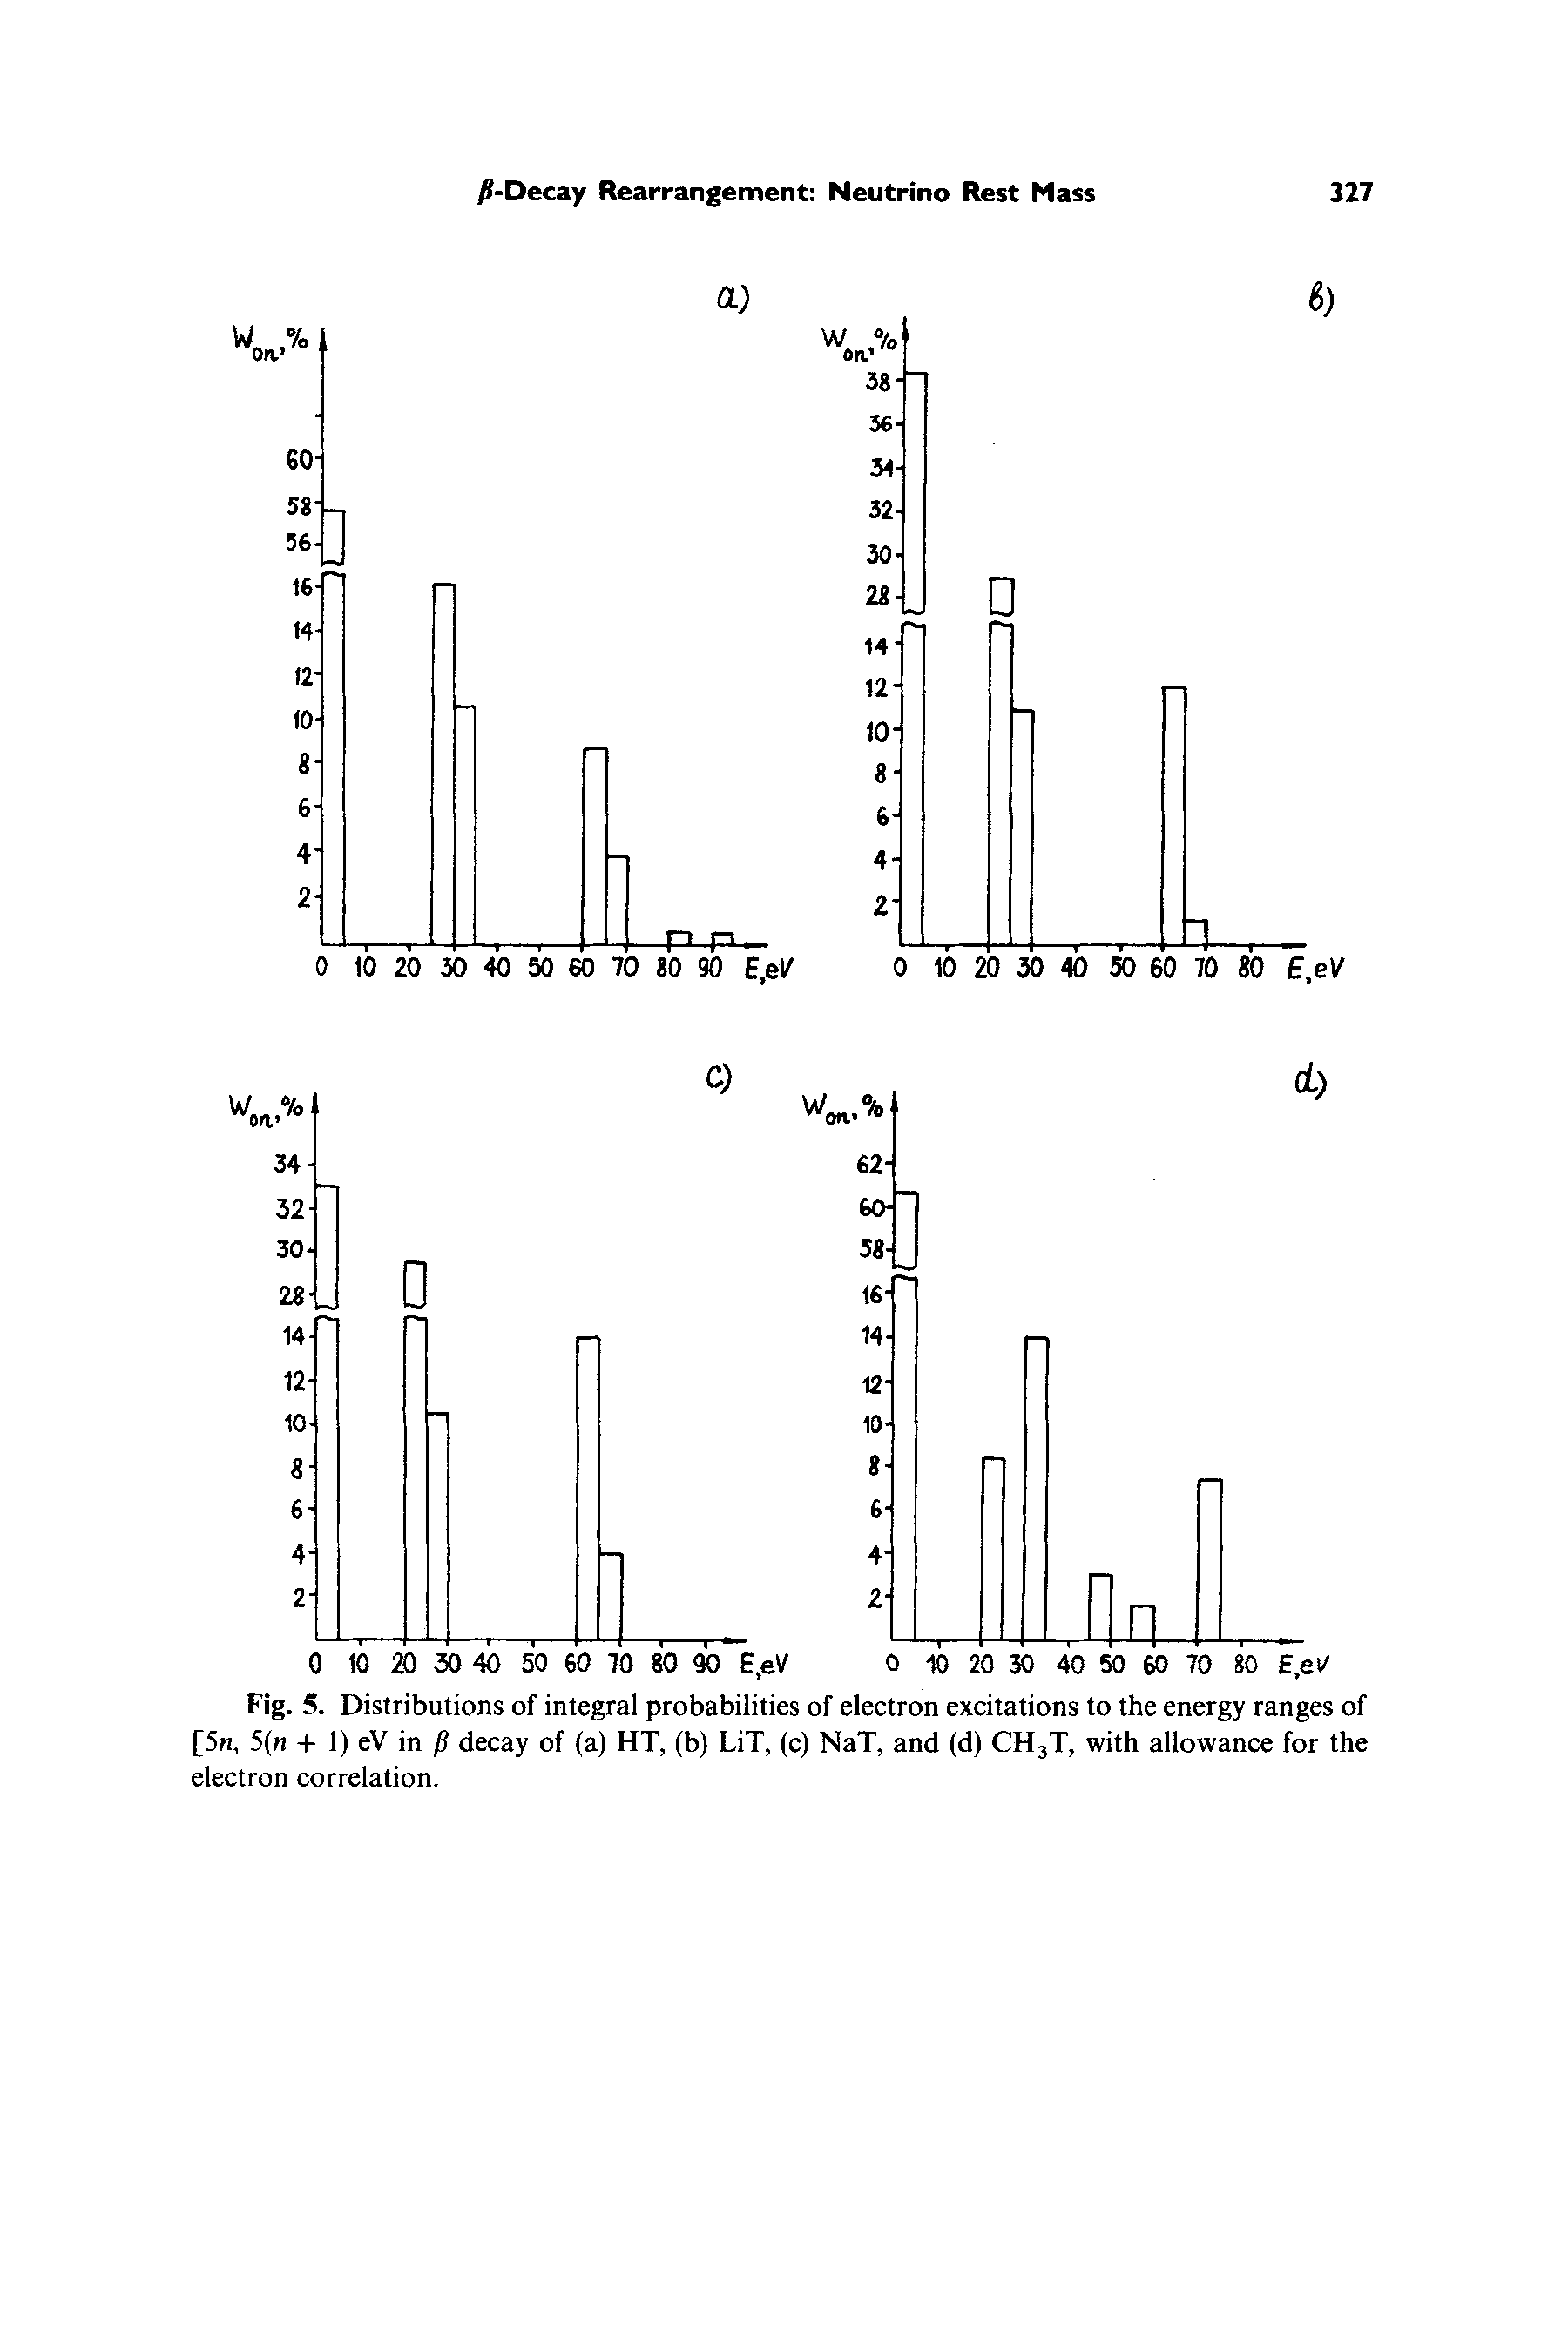 Fig. 5. Distributions of integral probabilities of electron excitations to the energy ranges of [5h, 5(n + 1) eV in fj decay of (a) HT, (b) LiT, (c) NaT, and (d) CH3T, with allowance for the electron correlation.